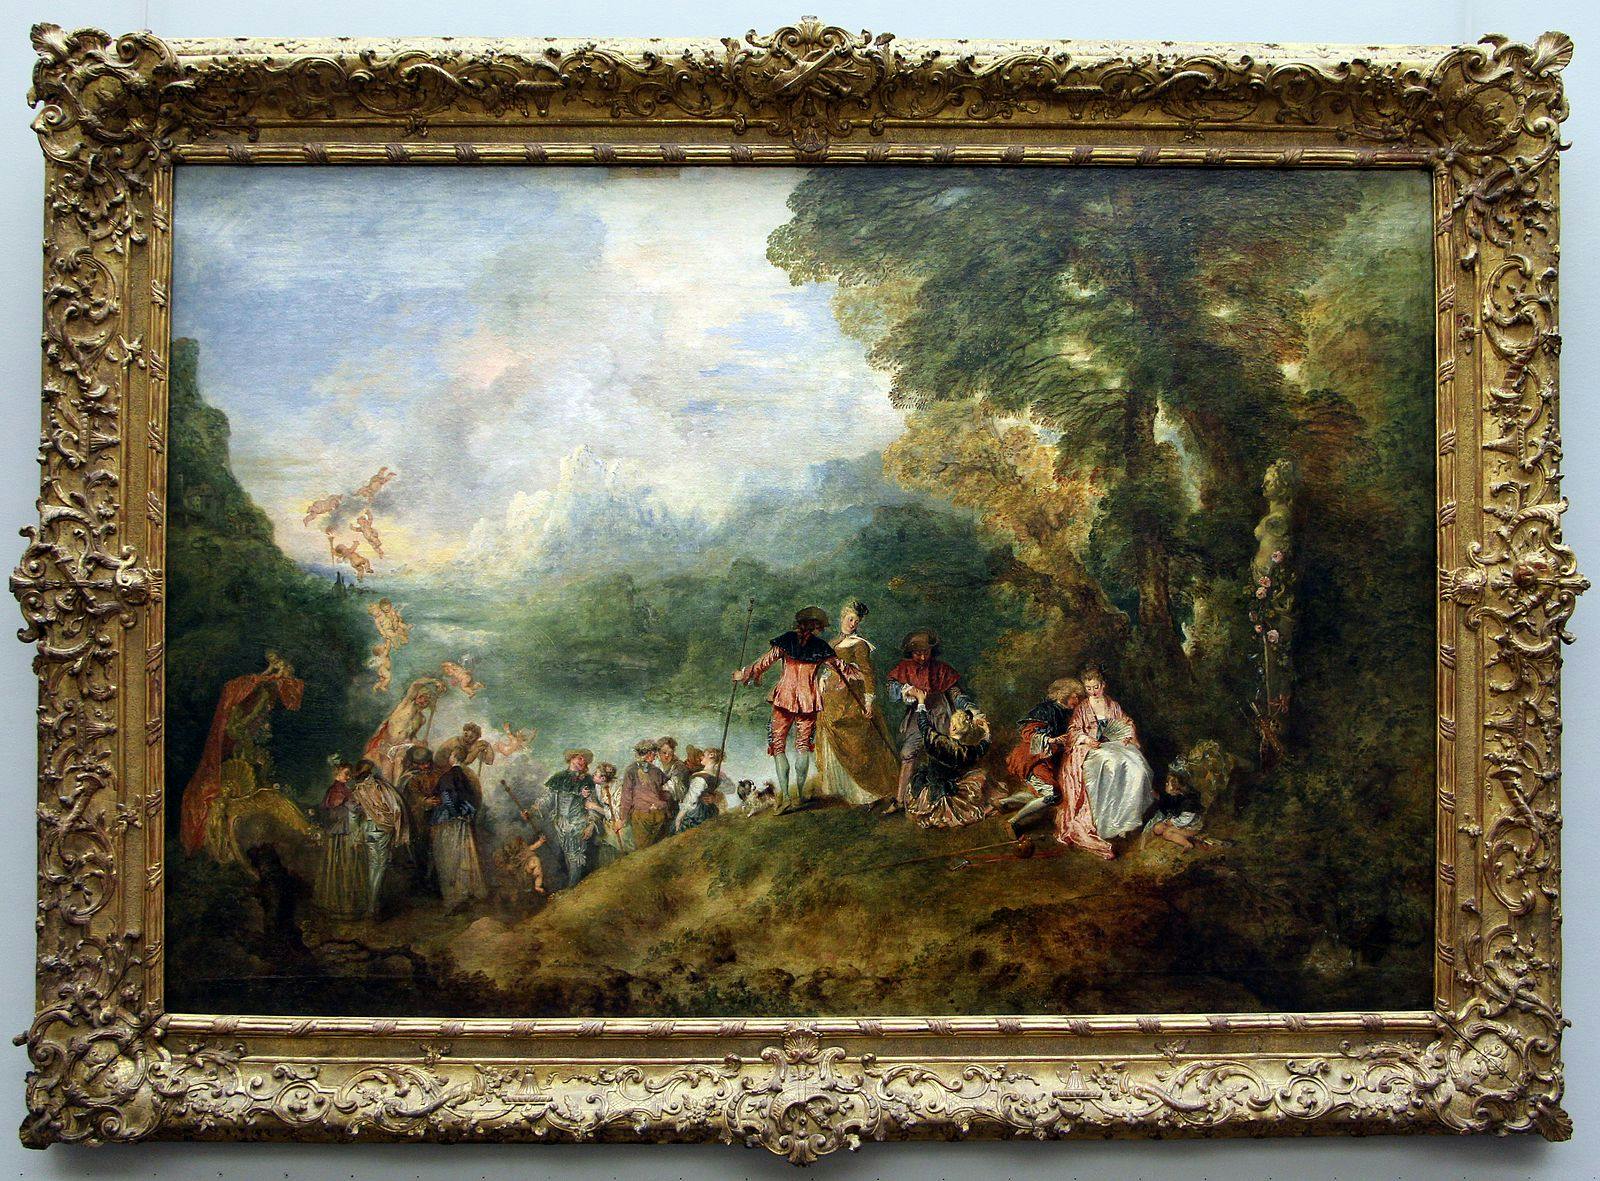 Image of Jean-Antoine Watteau's The Embarkation for Cythera